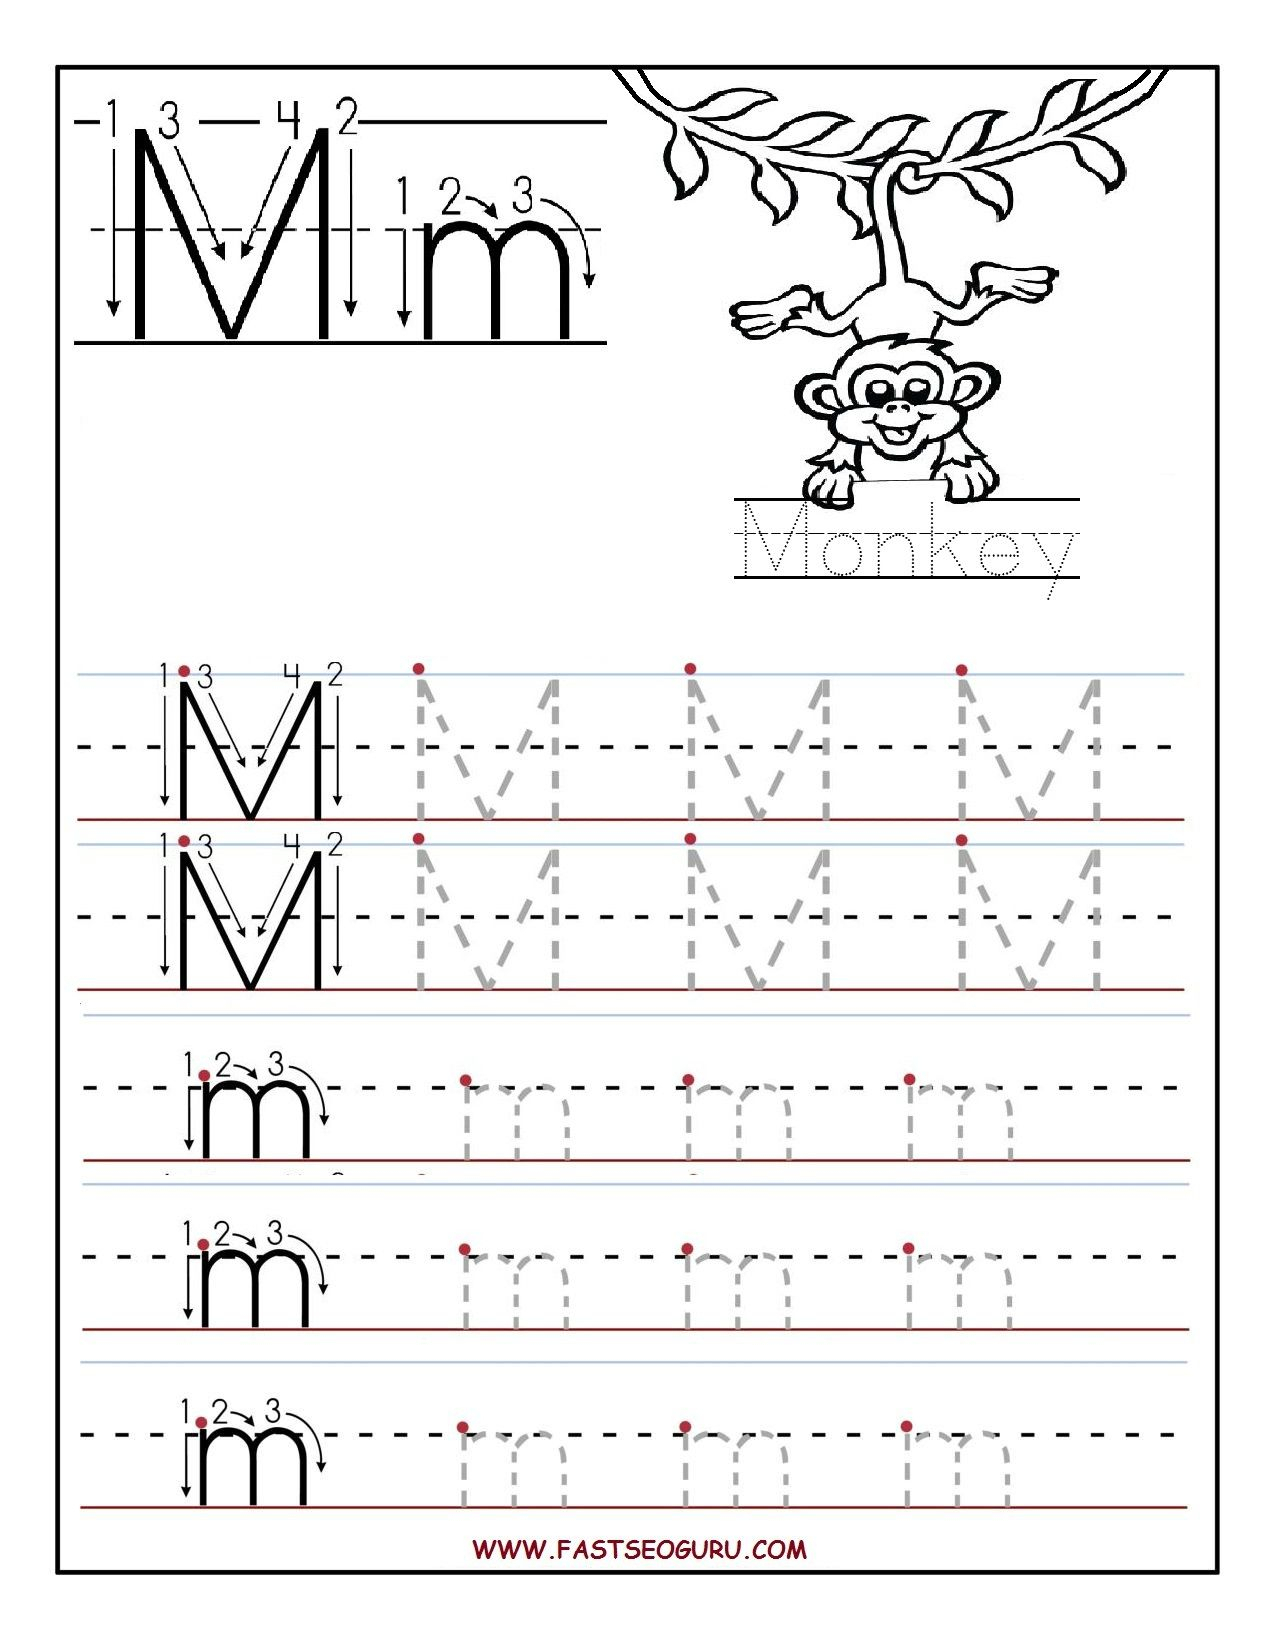 Printable Letter M Tracing Worksheets For Preschool throughout Free Online Tracing Letters